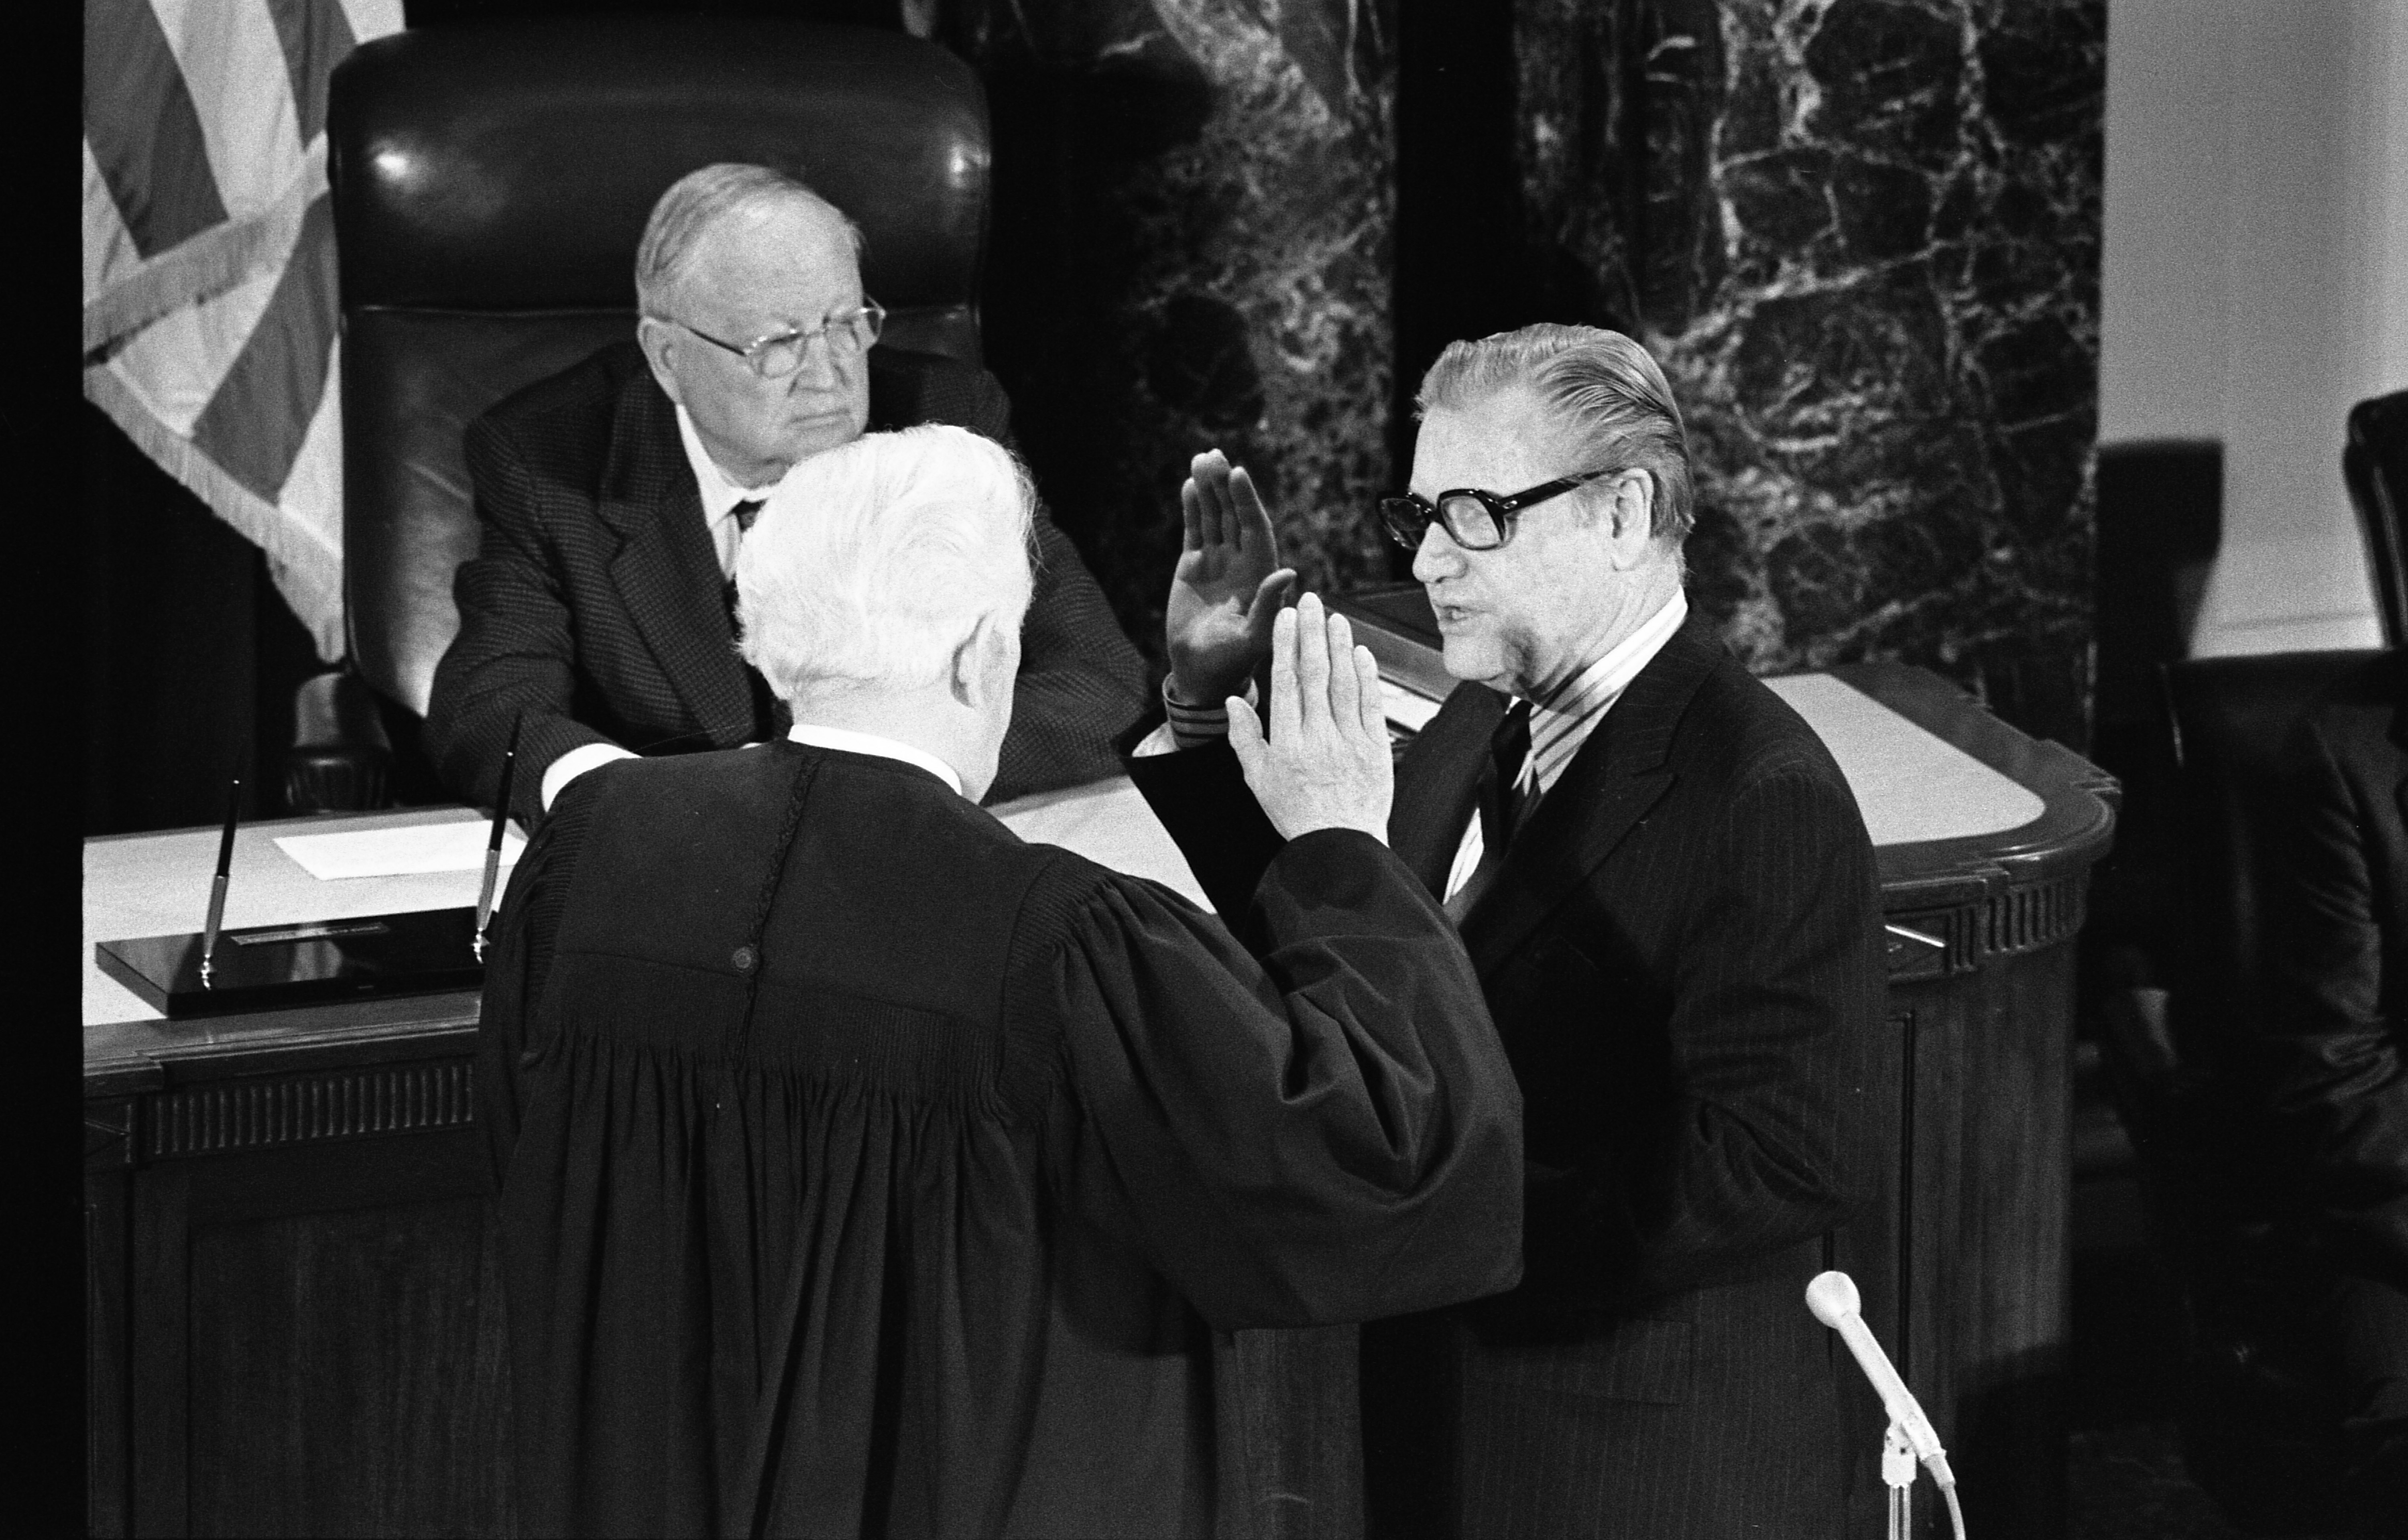 Nelson Rockefeller being sworn in by Chief Justice Burger.